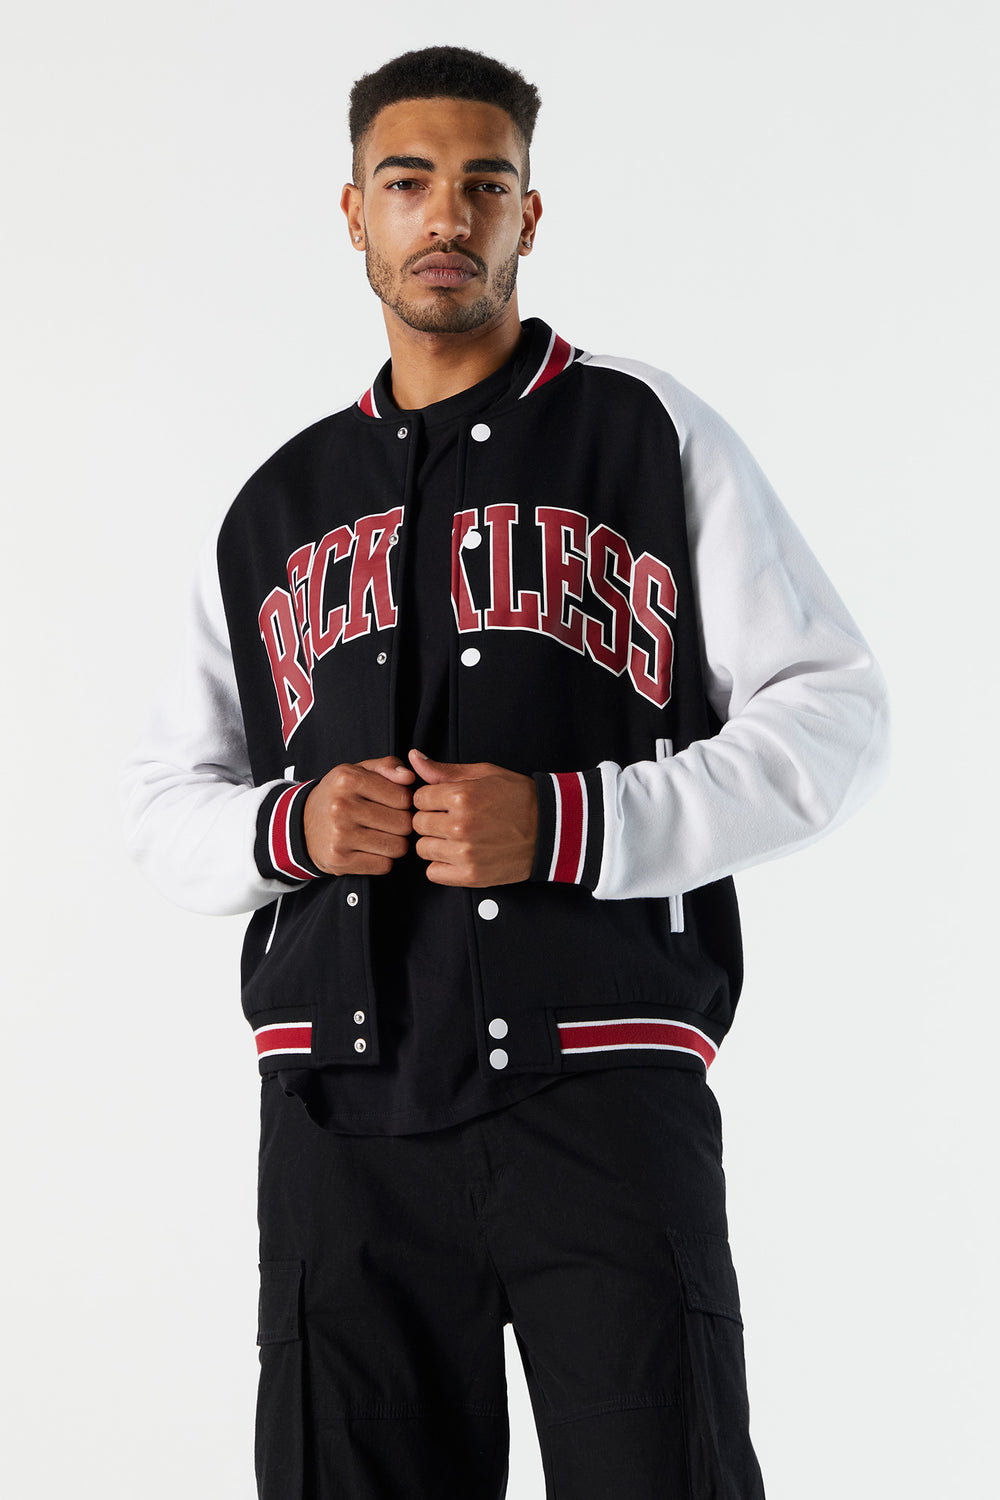 Reckless Embroidered Varsity Jacket Reckless Embroidered Varsity Jacket 2